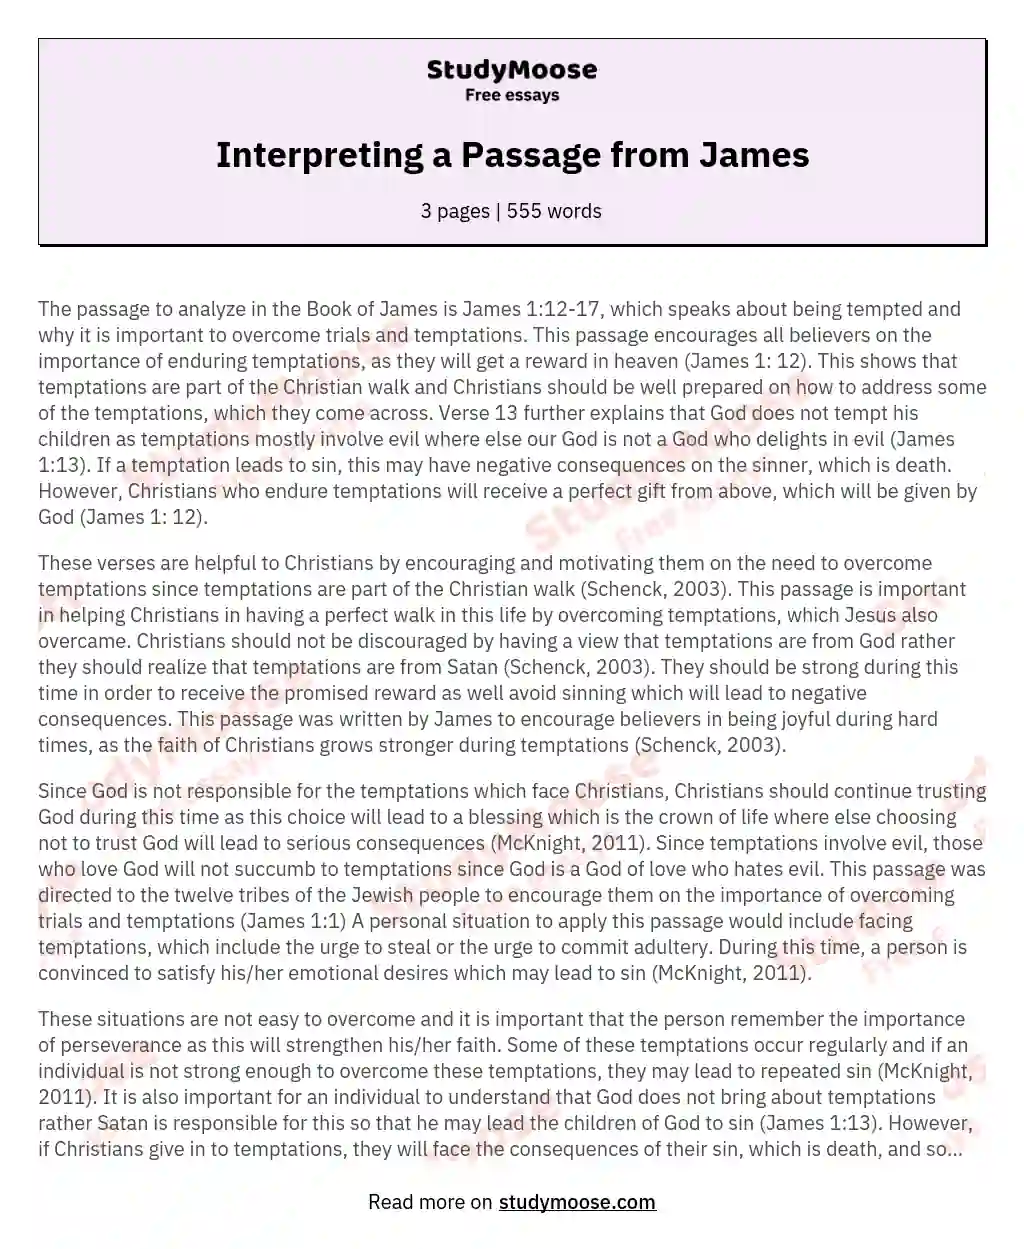 Interpreting a Passage from James